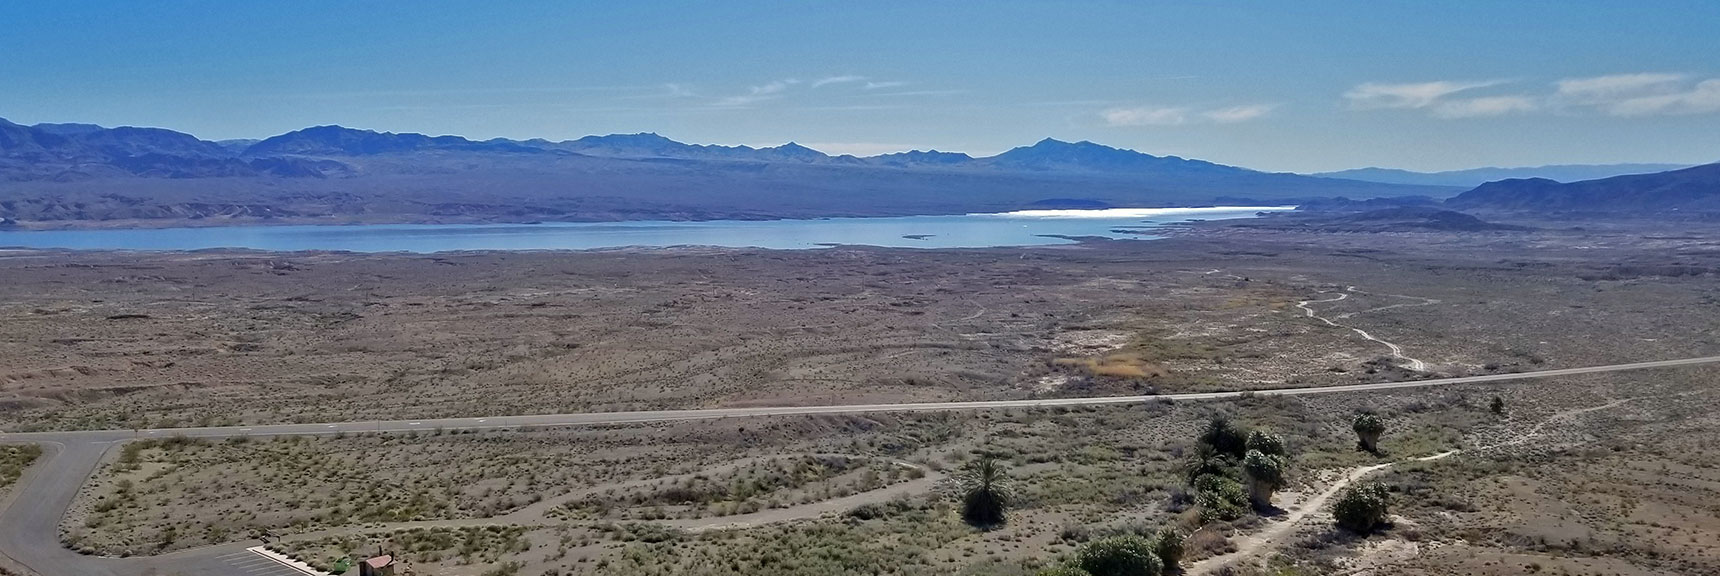 Overton Arm of Lake Mead Viewed from Muddy Mountains Above Roger's Spring On Northshore Road in Lake Mead National Park, Nevada